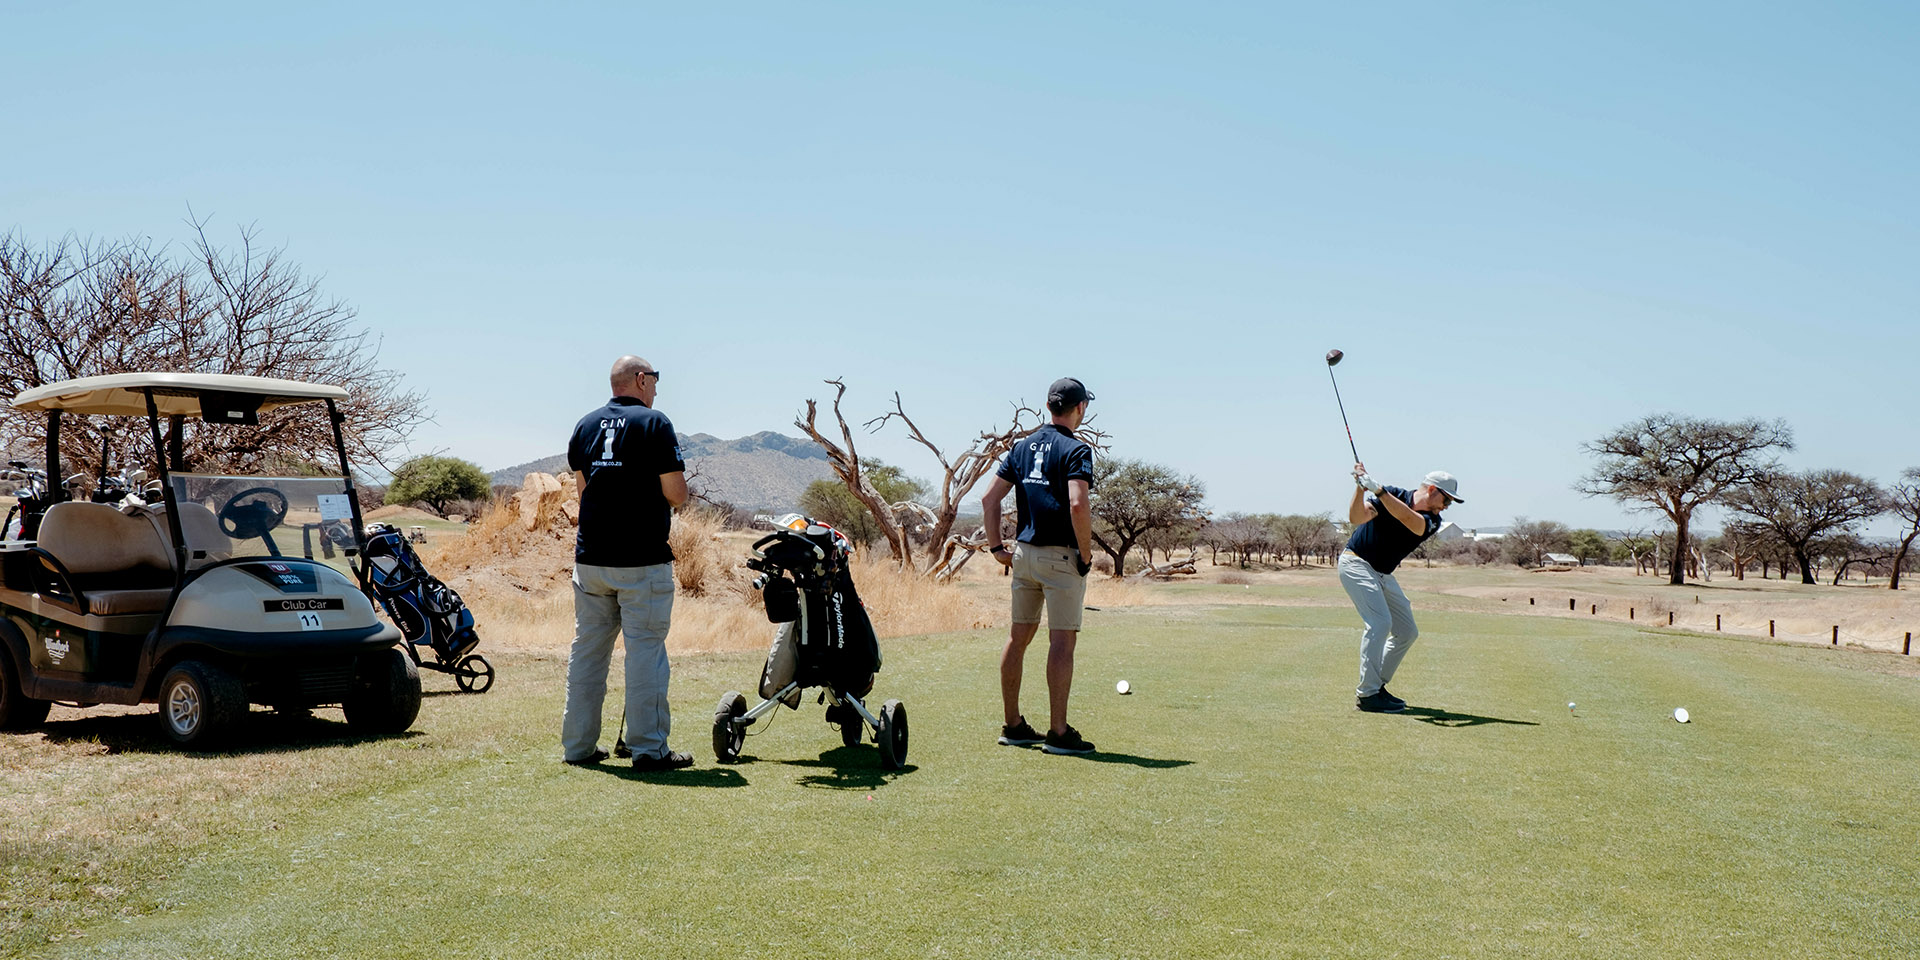 Golf players on green, Namibia